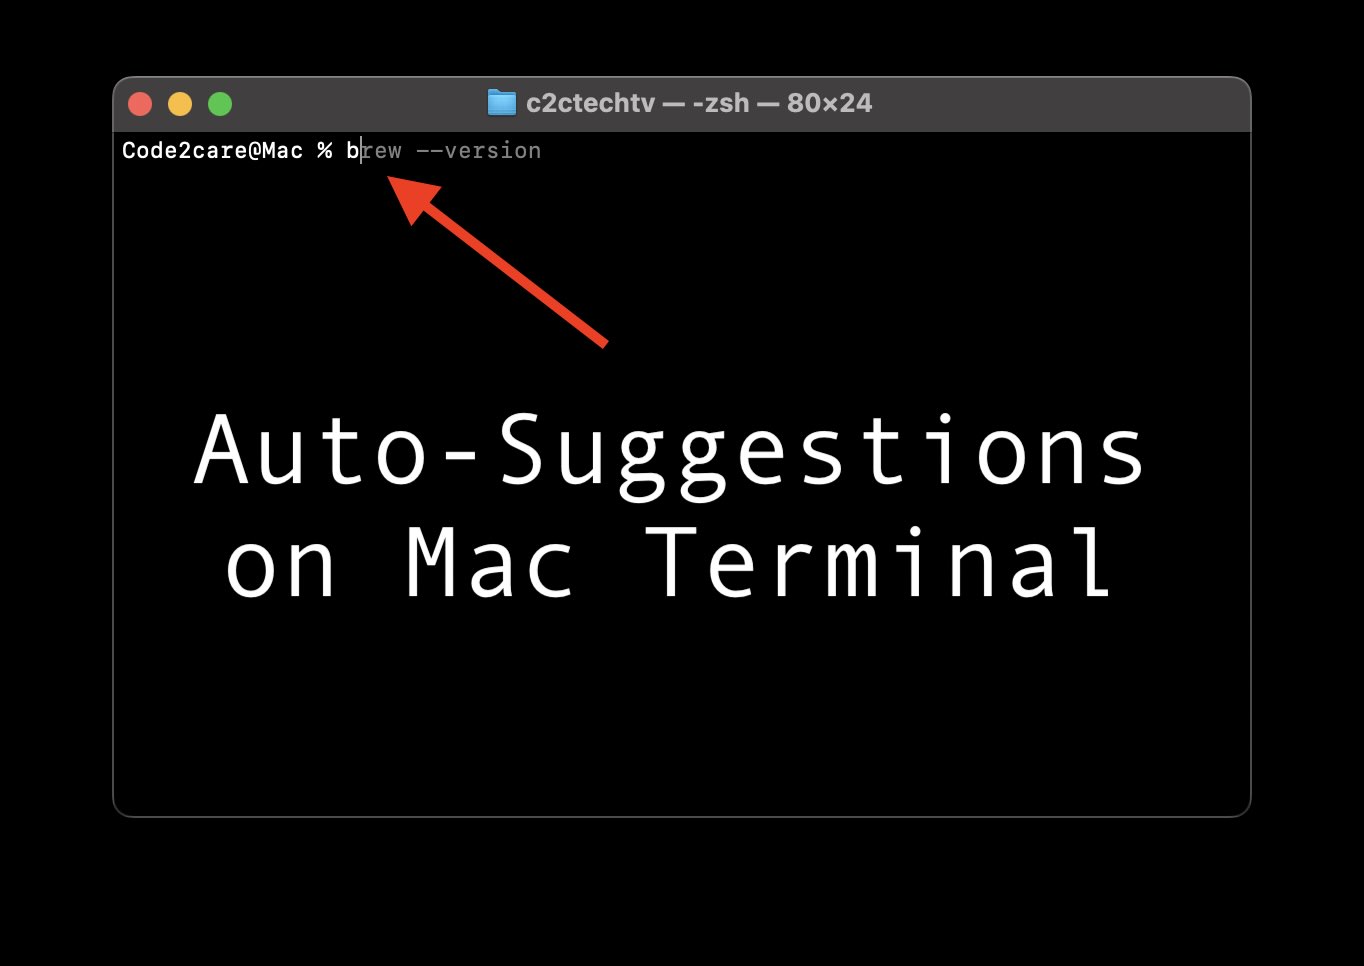 Turning on Auto-Suggestions on Mac Terminal